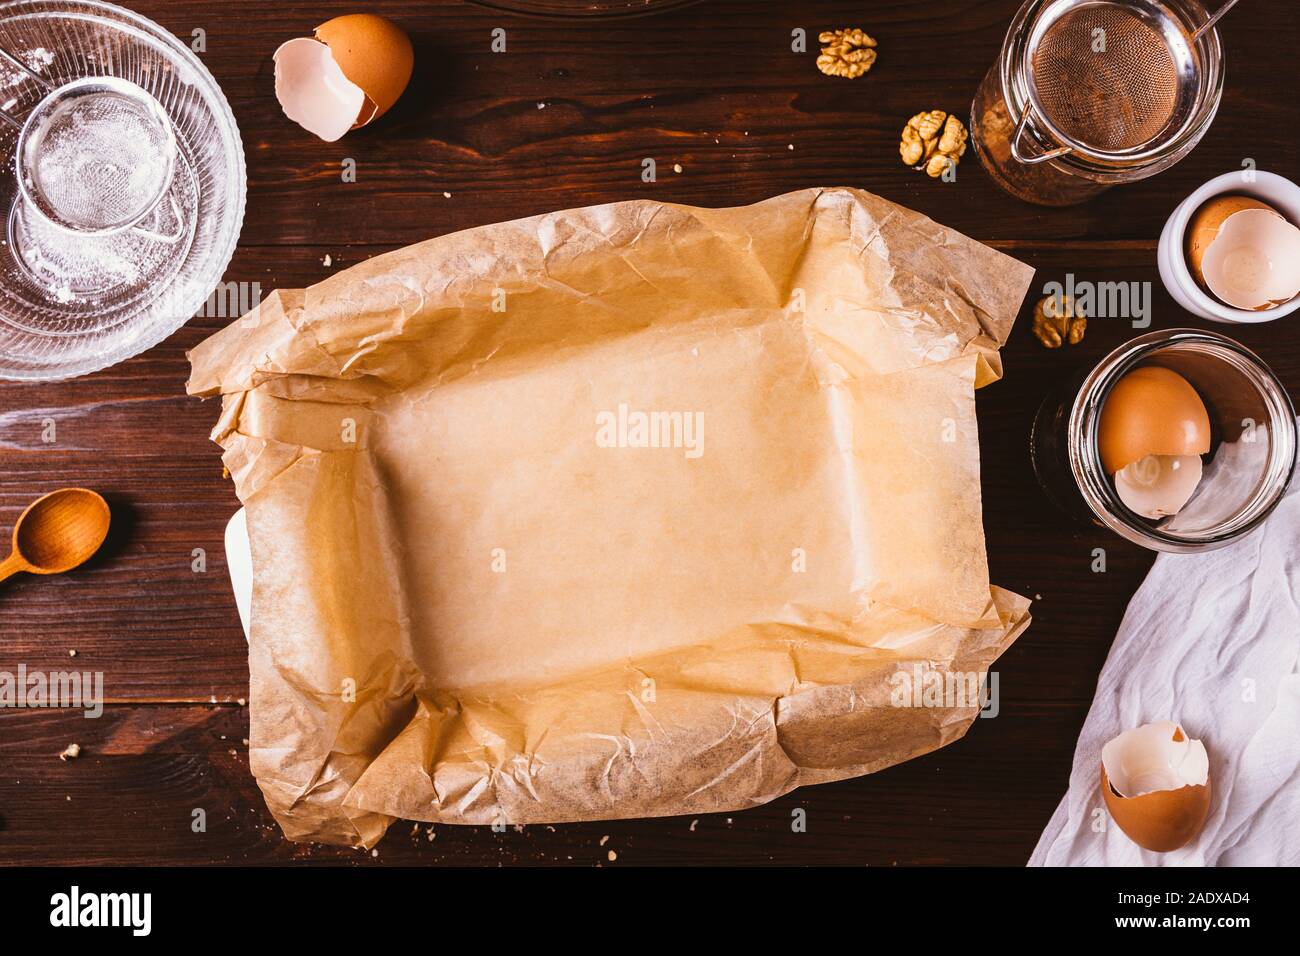 Unfilled baking dish covered with parchment on rustic dark wooden background among ingredients and utensils for making pastry. Stock Photo